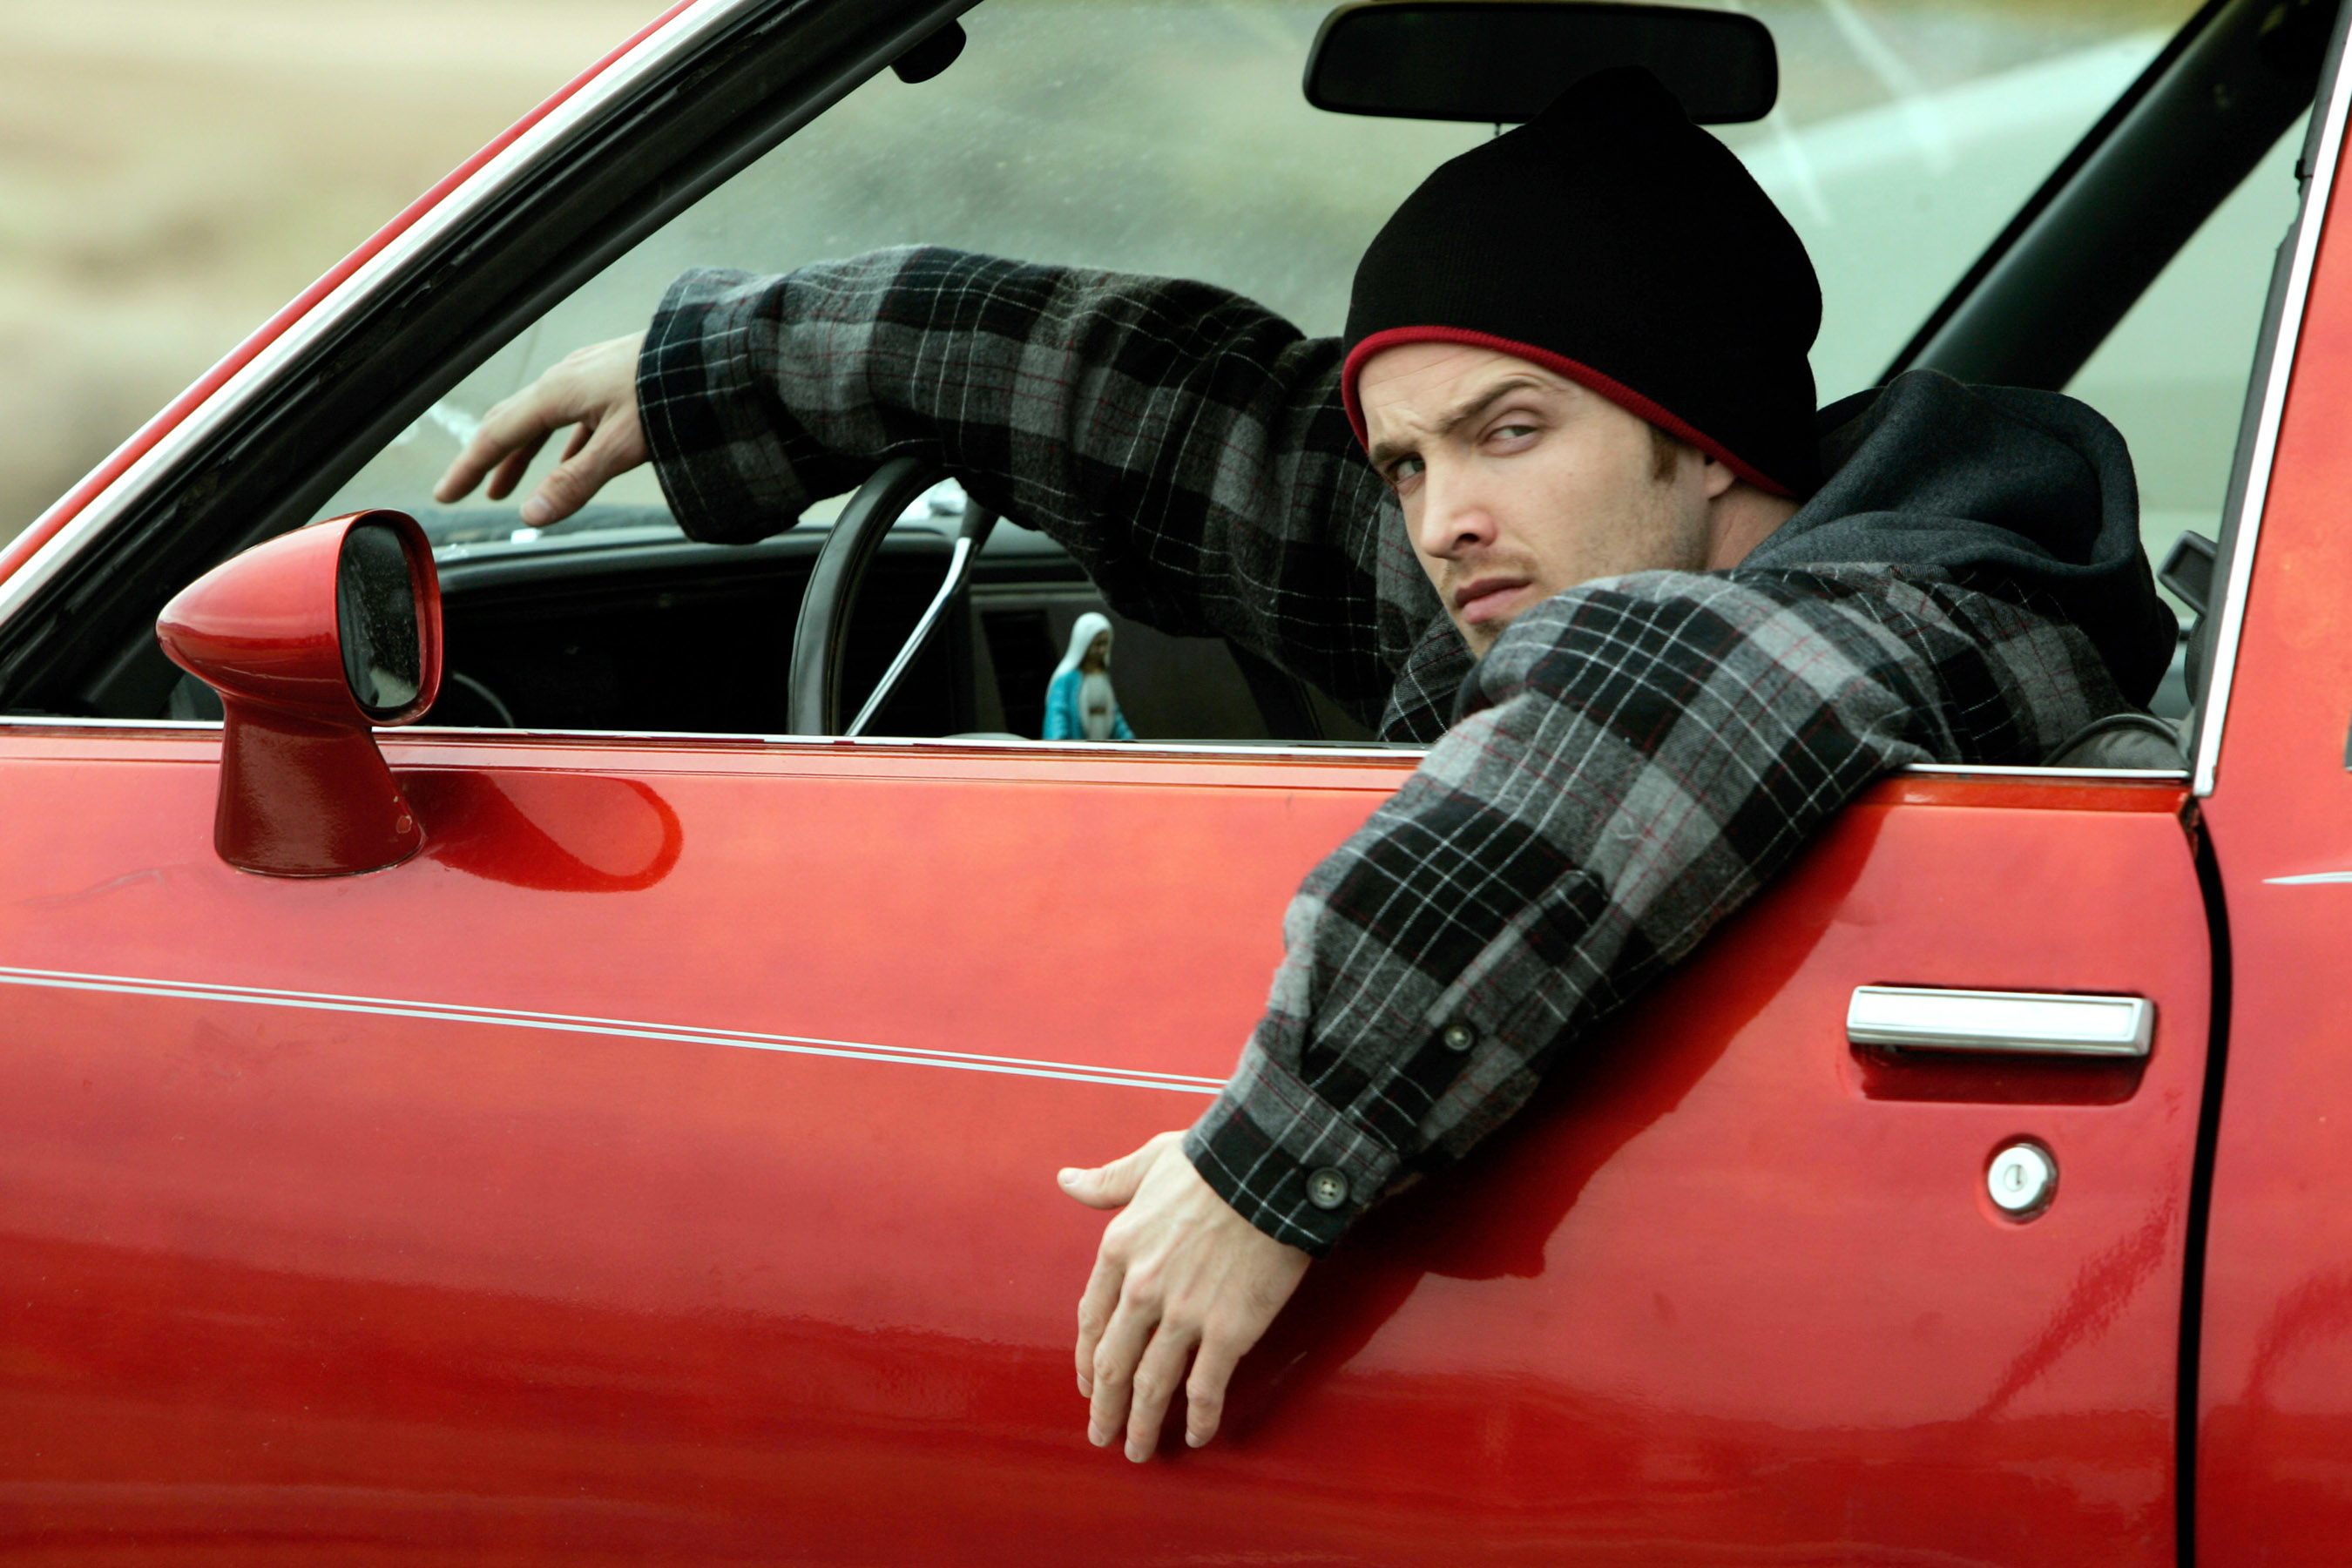 Jesse Pinkman, wearing a beanie and plaid jacket, looks concerned while leaning out of a red car window